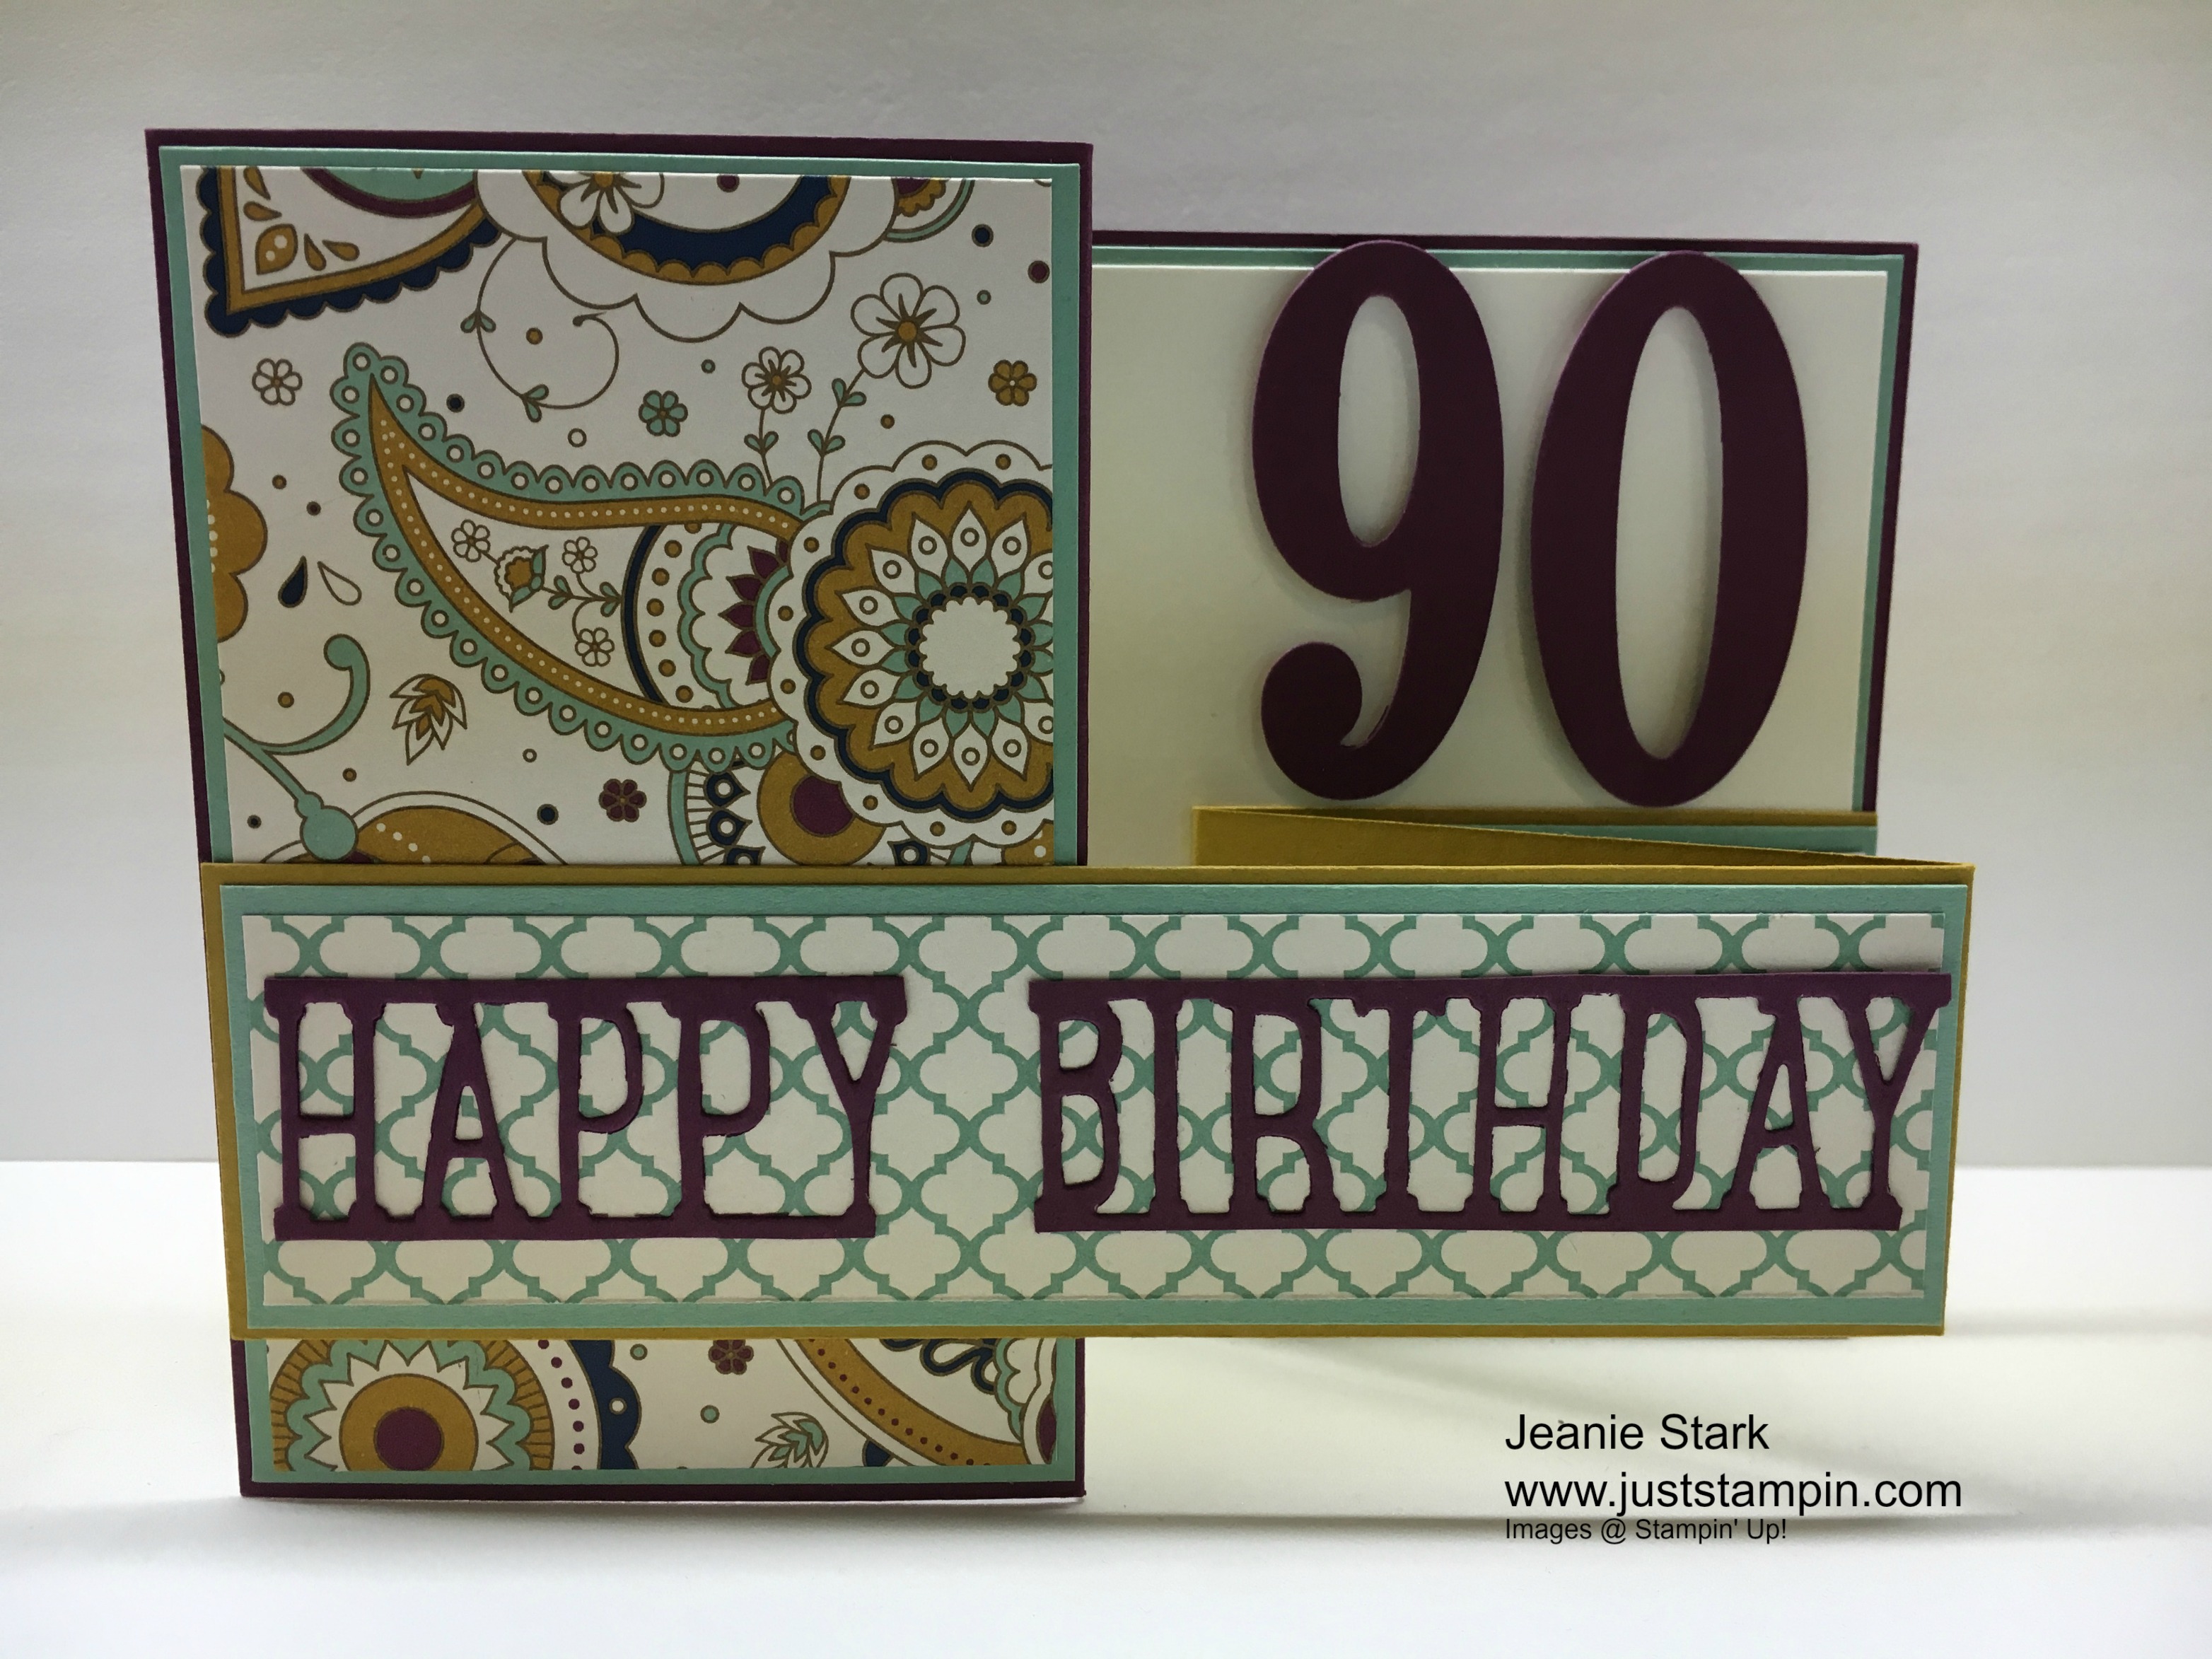 Stampin Up Party Pop Up Thinlits and Large Number Dies Birthday card idea - Jeanie Stark StampinUp